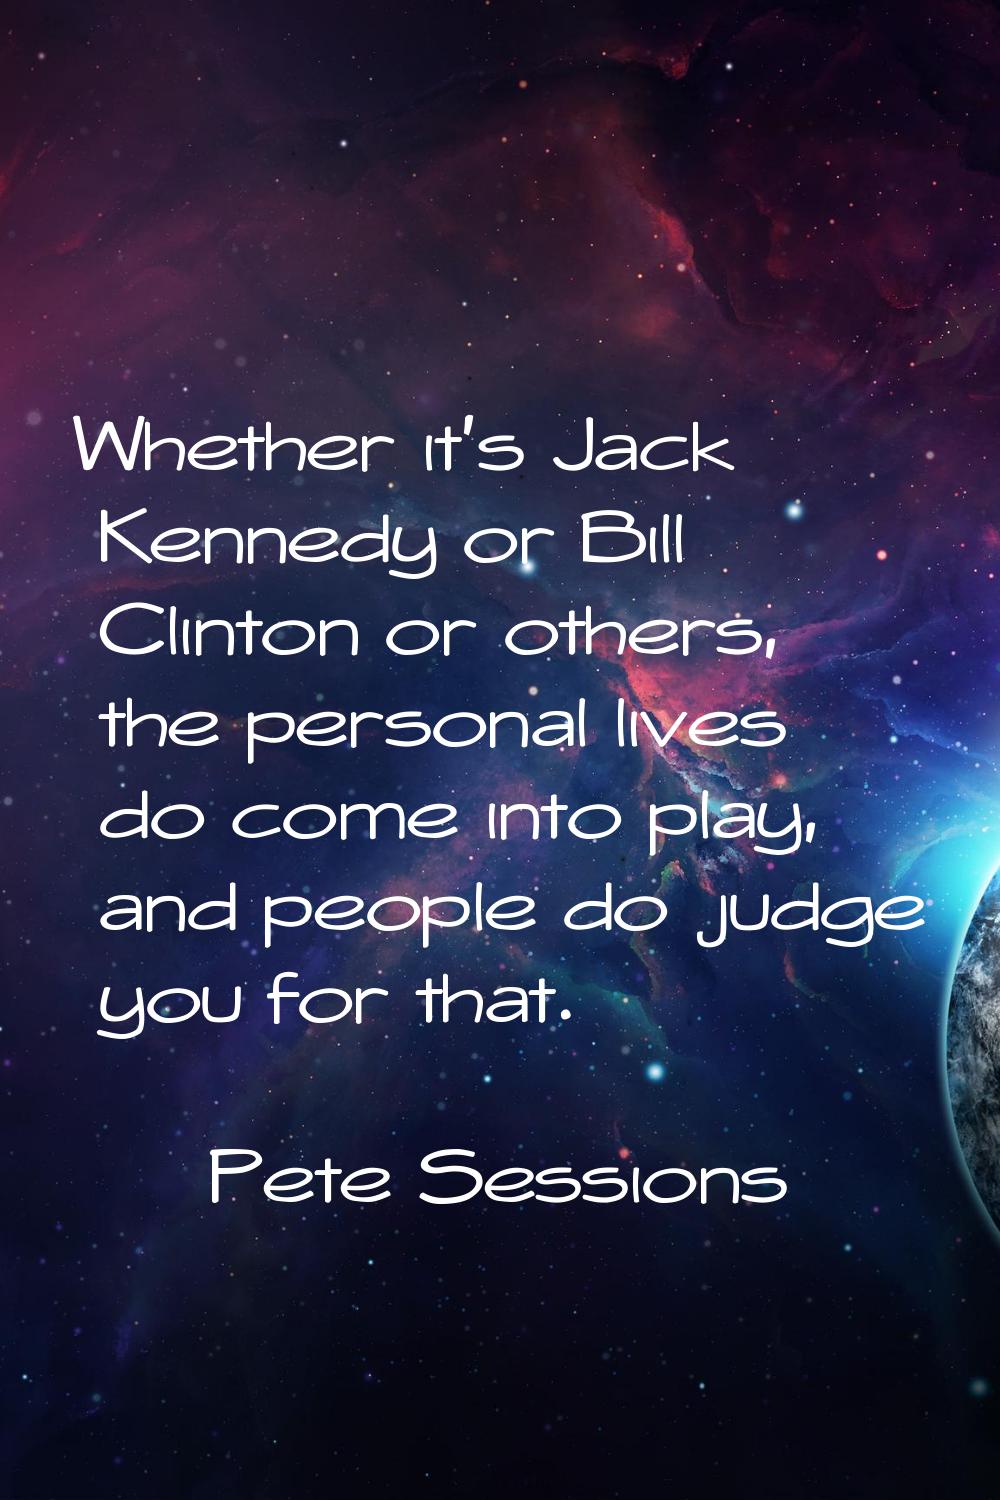 Whether it's Jack Kennedy or Bill Clinton or others, the personal lives do come into play, and peop